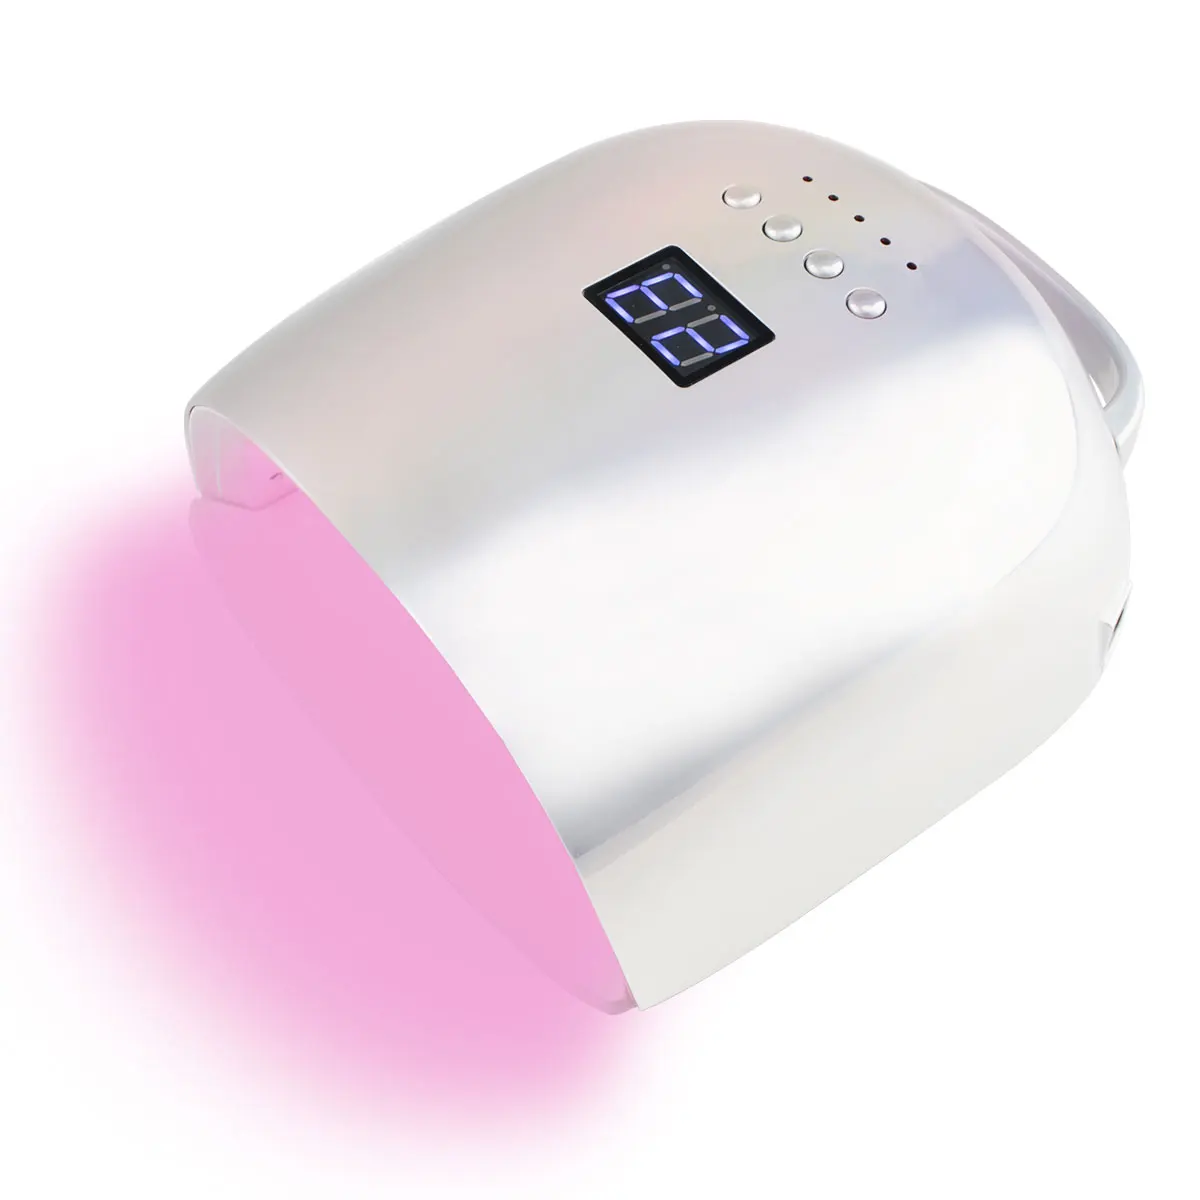 86W Portable Cordless Wireless Rechargeable Professional RED Light LED UV Gel Nails Dryer Curing Lamp enlarge